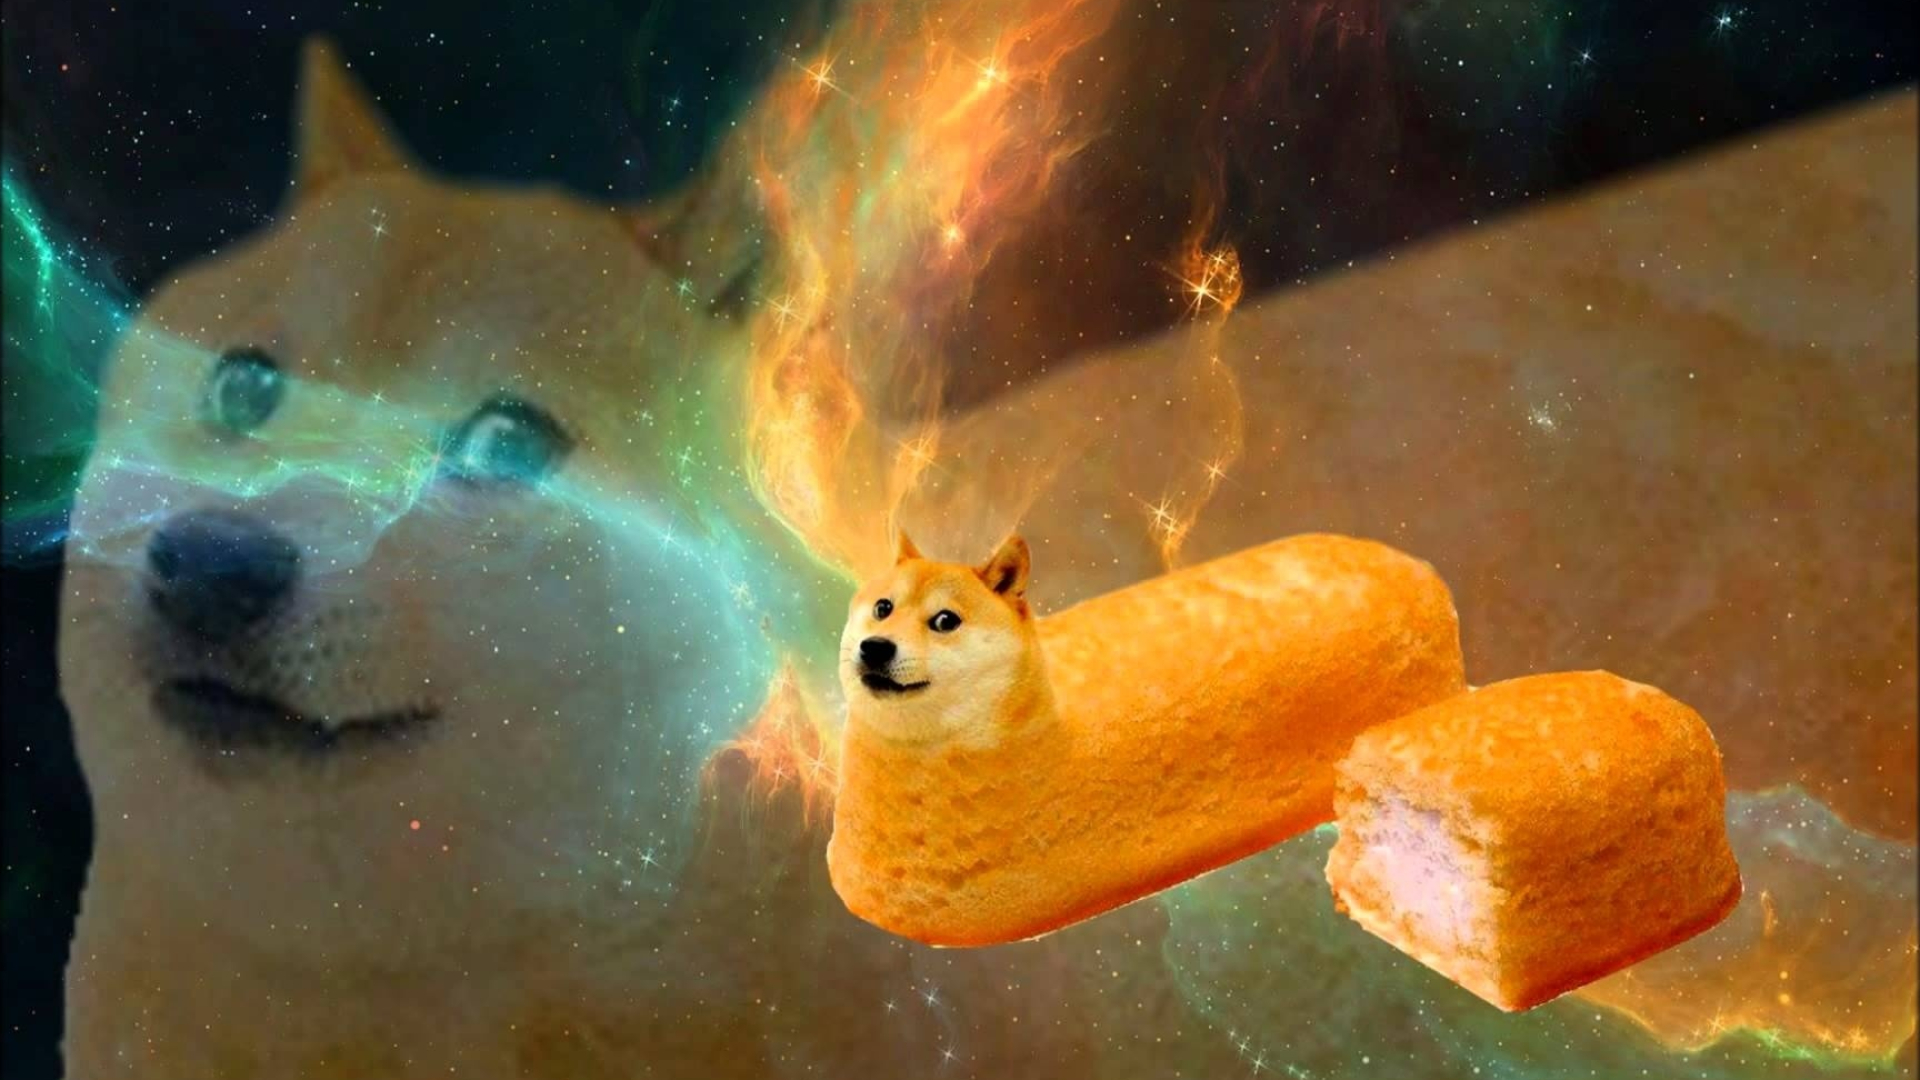 Twinkies, Doge space wallpaper, Whimsical background, Canine-themed design, 1920x1080 Full HD Desktop